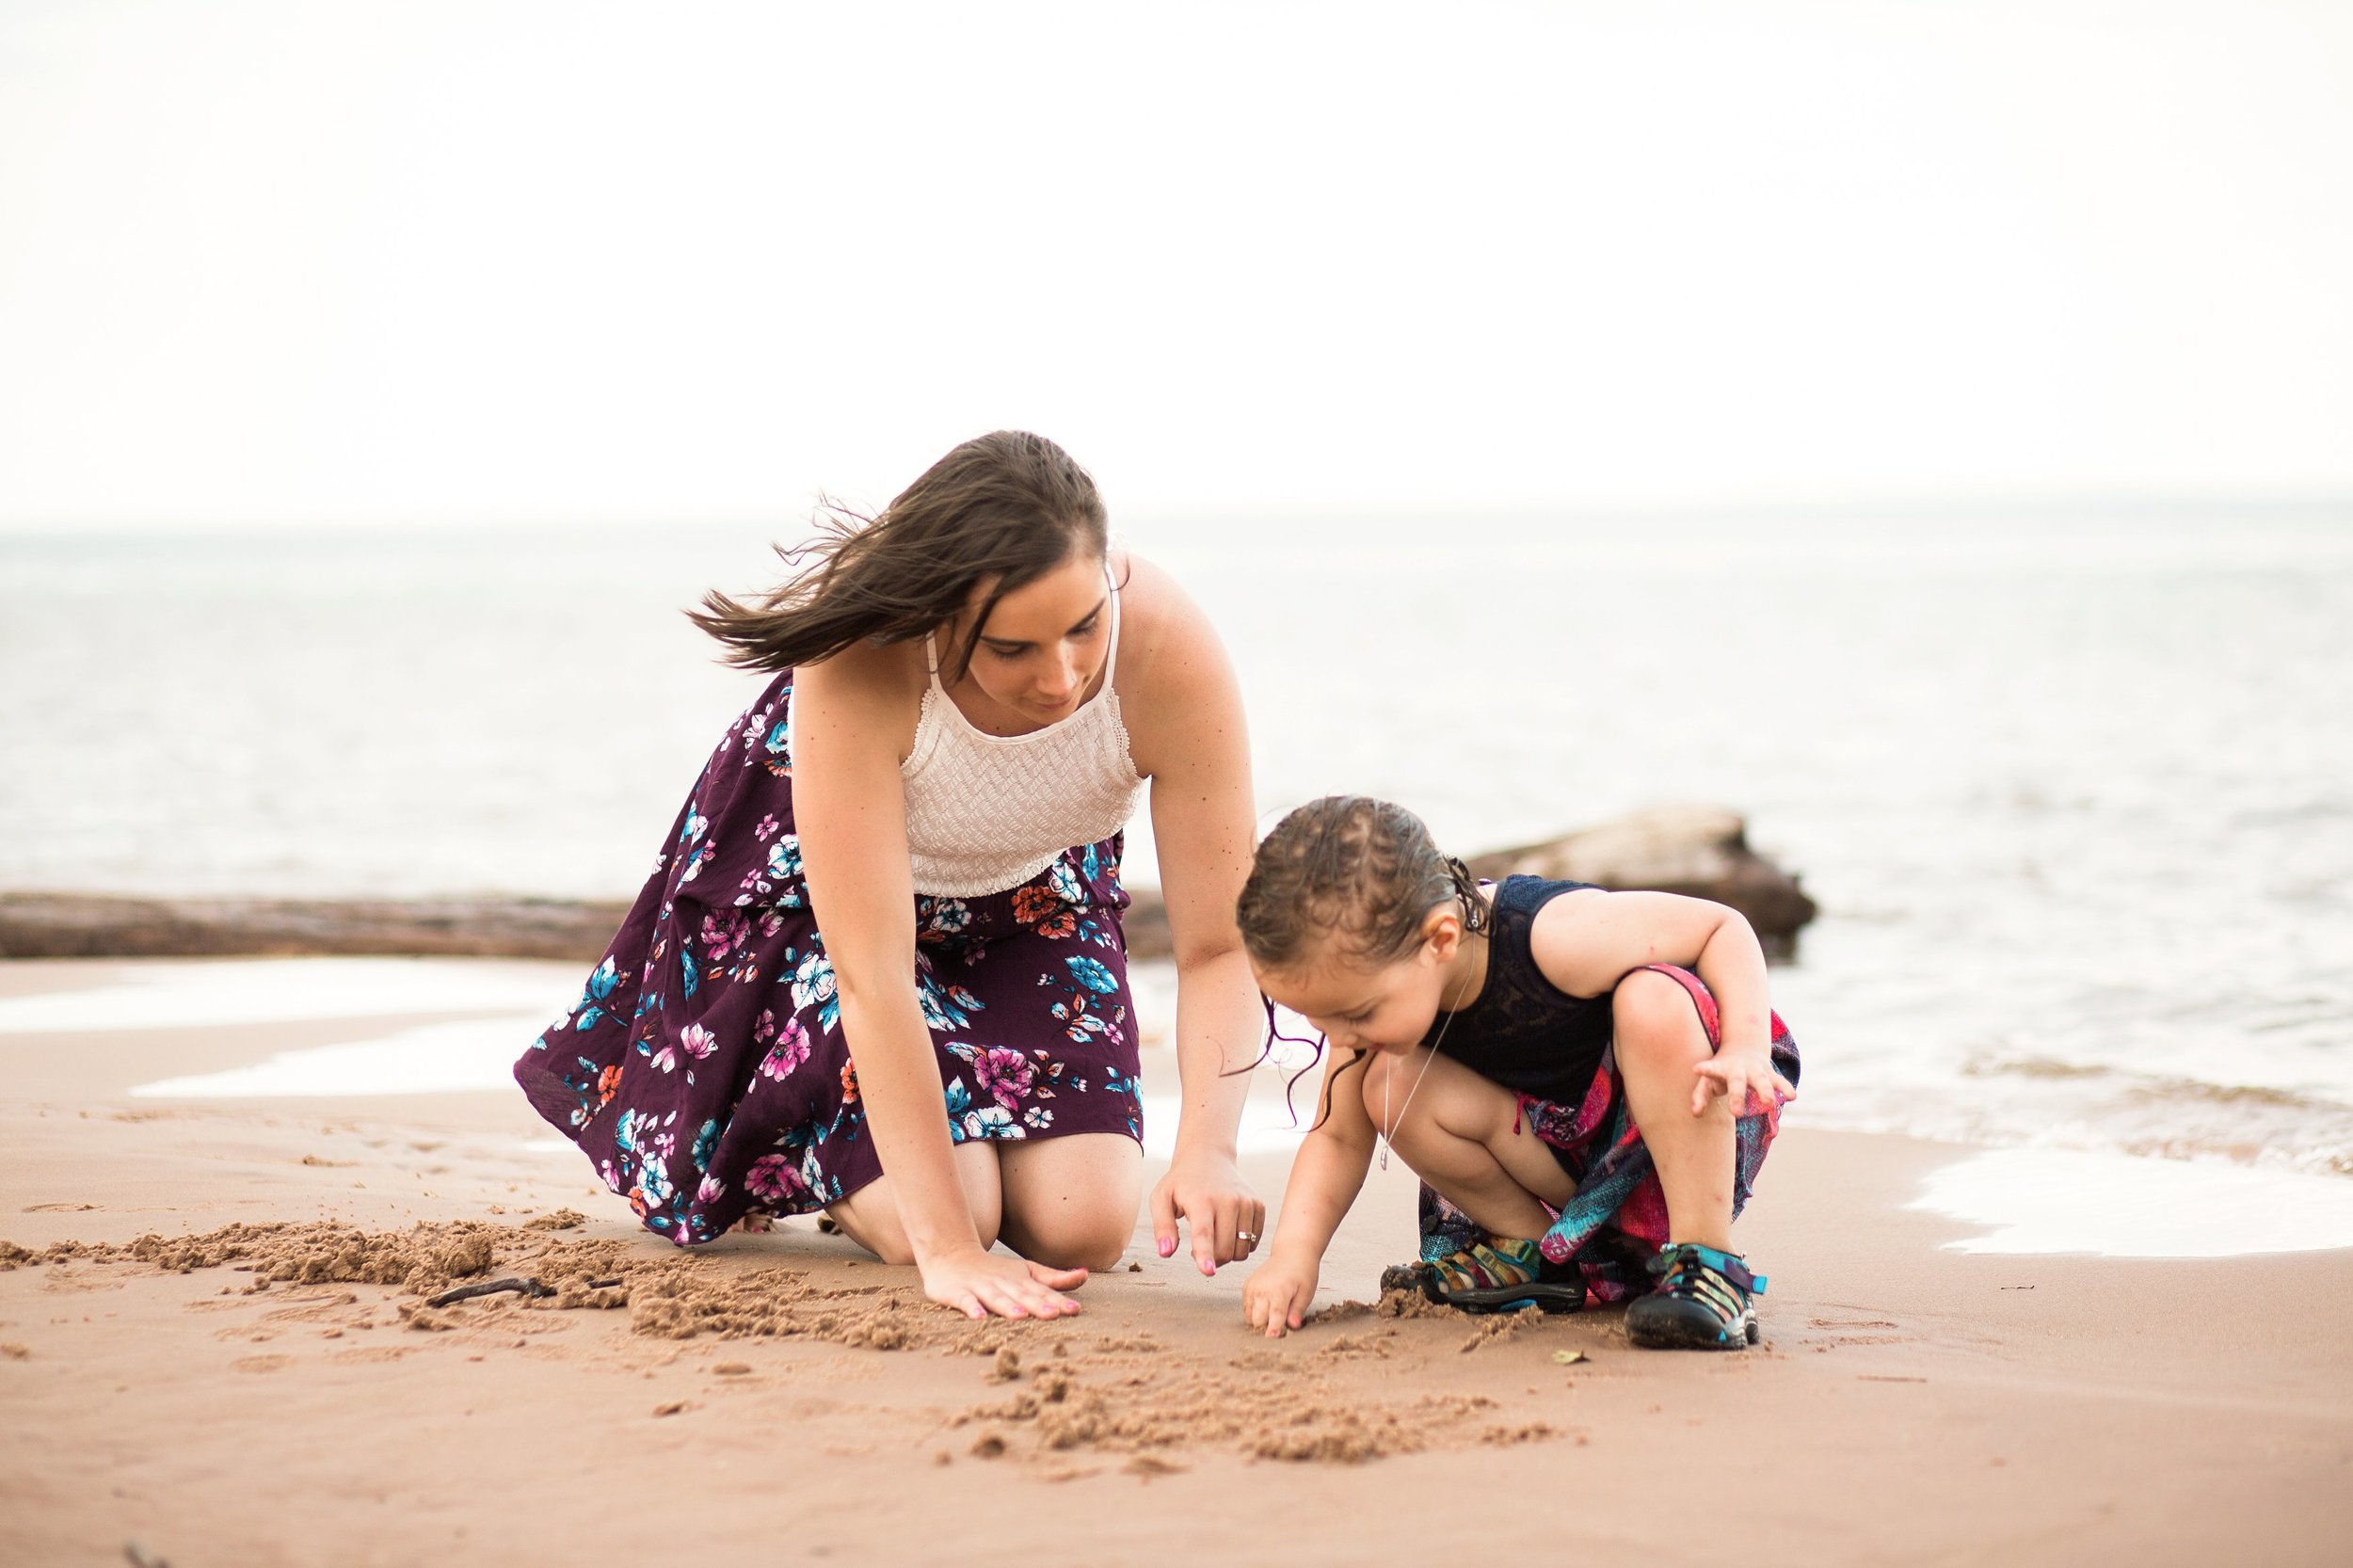 Mommy and Me Fun Beach Portraits Lifestyle Photography by Seattle WA Portrait Photographer Janelle Elaine.jpg